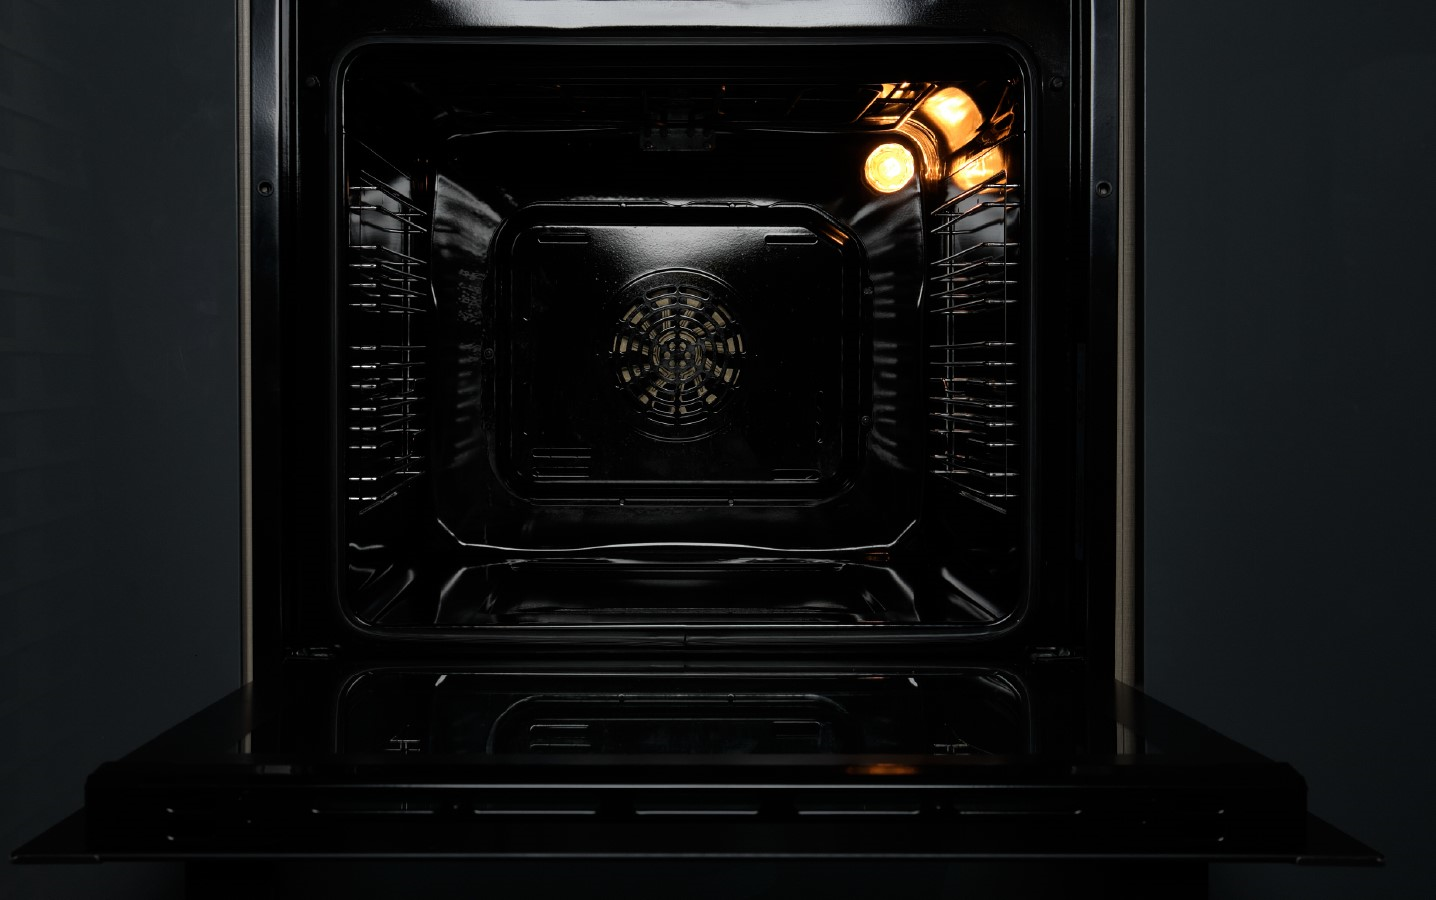 An oven with lights in it

Description automatically generated